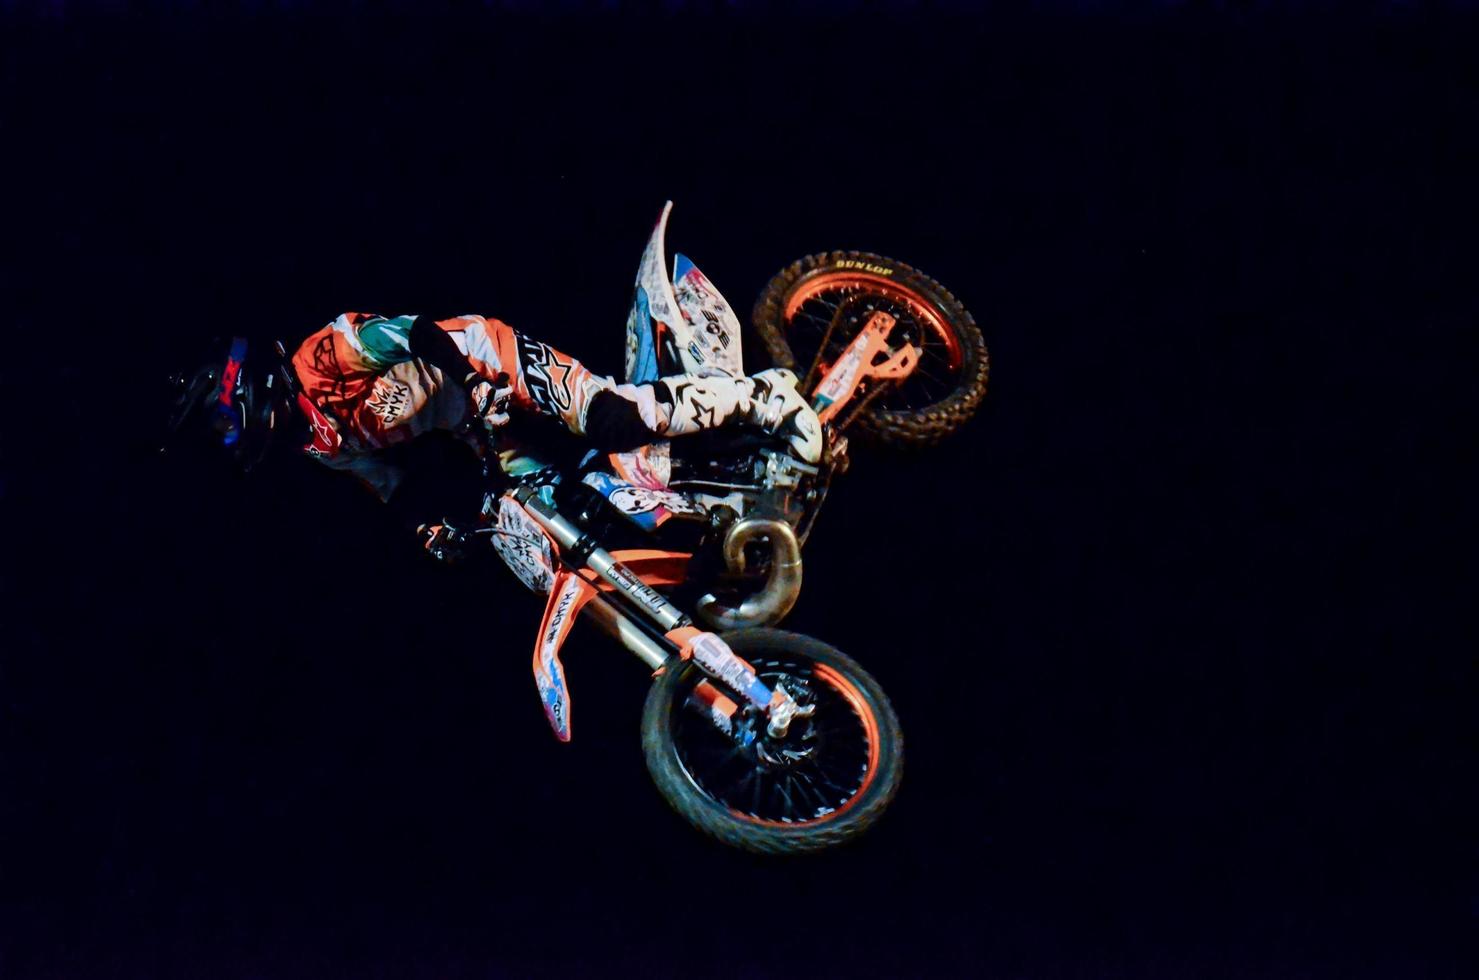 Motocross Motorbike and Quads Freestyle Show in North Italy, September, 2014 photo